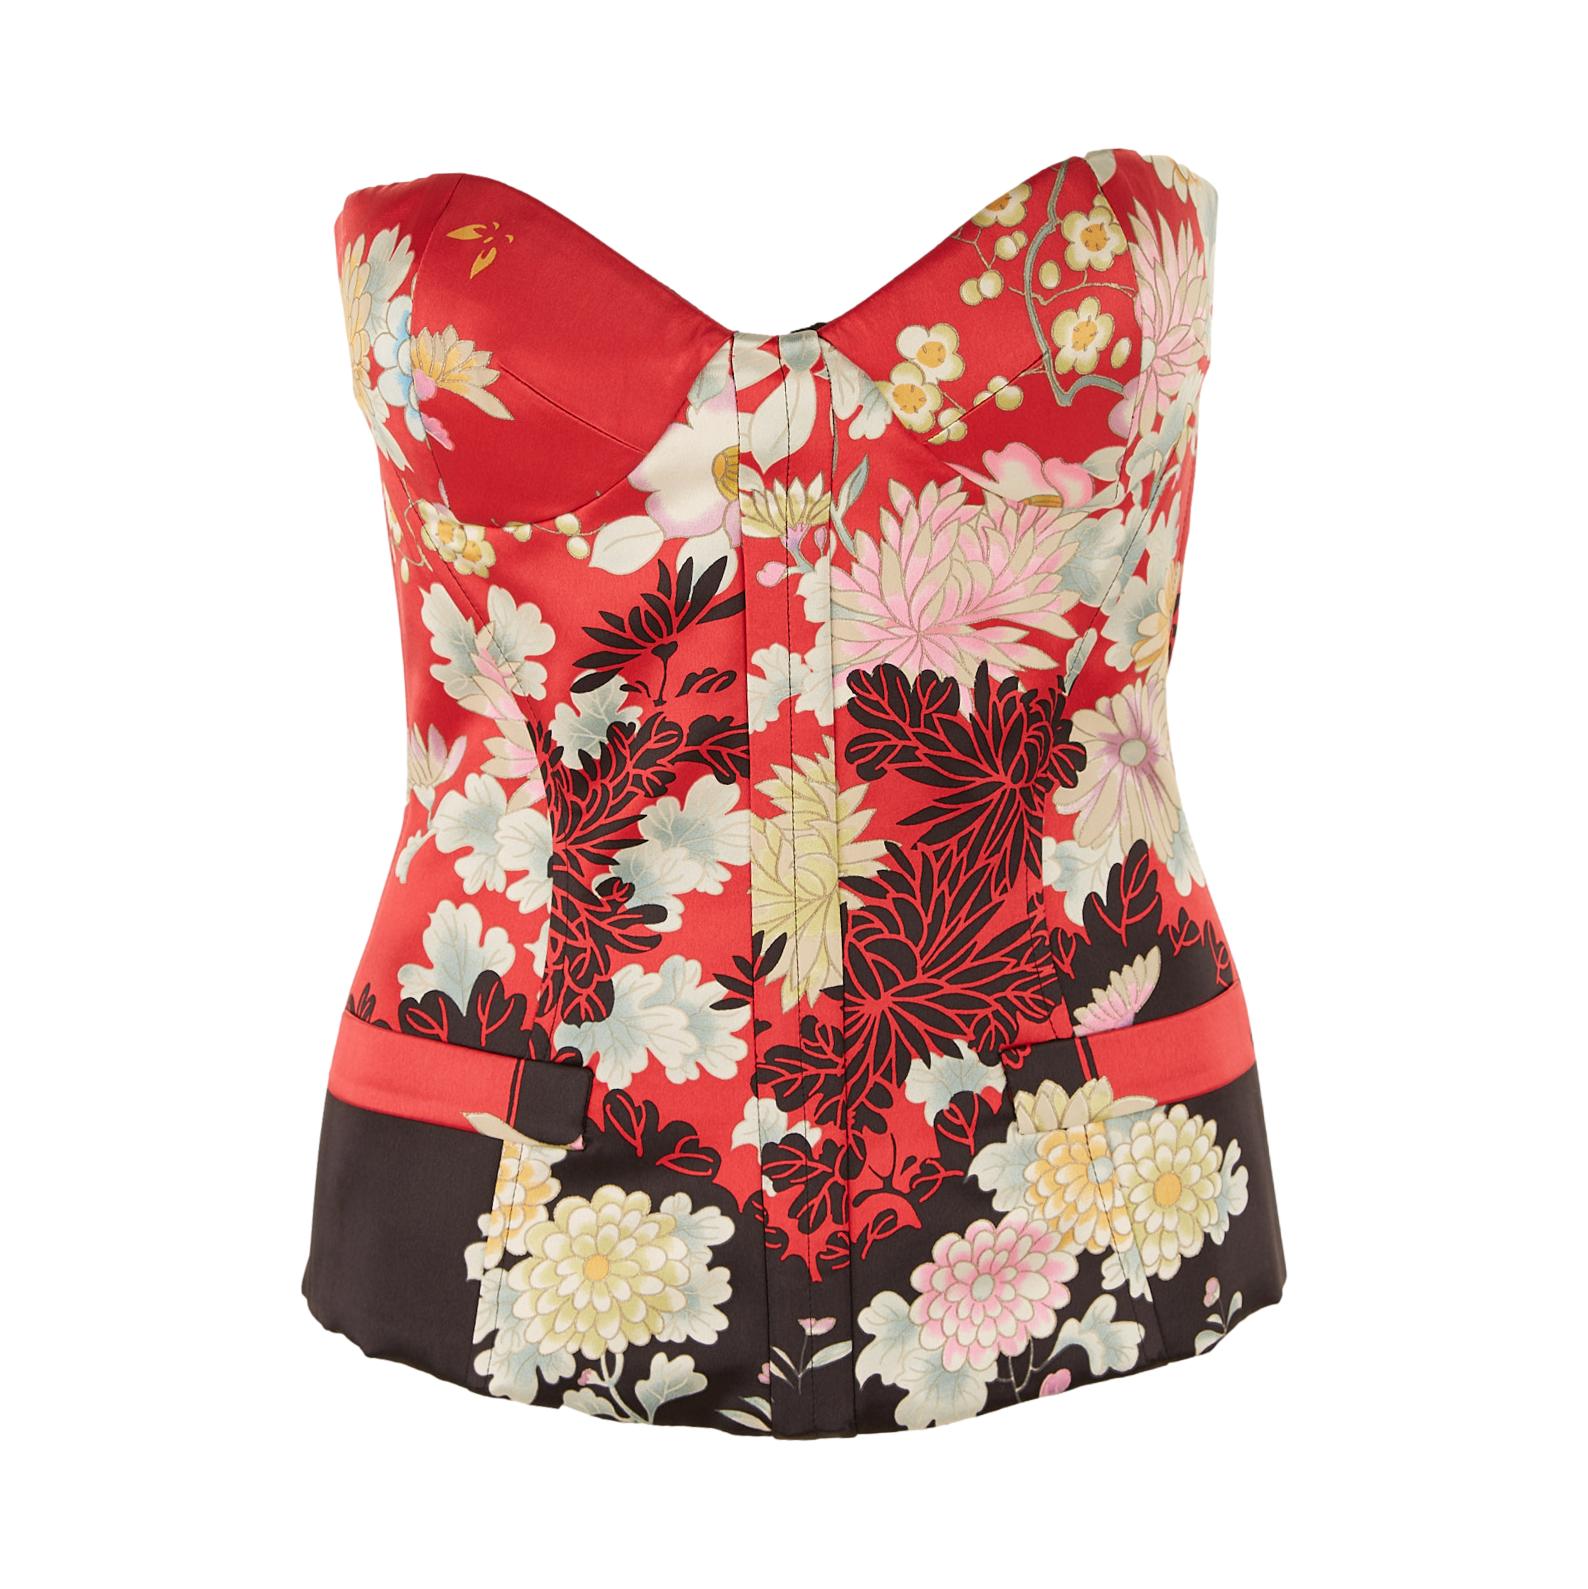 Roberto Cavalli Red Floral Print Bustier Top